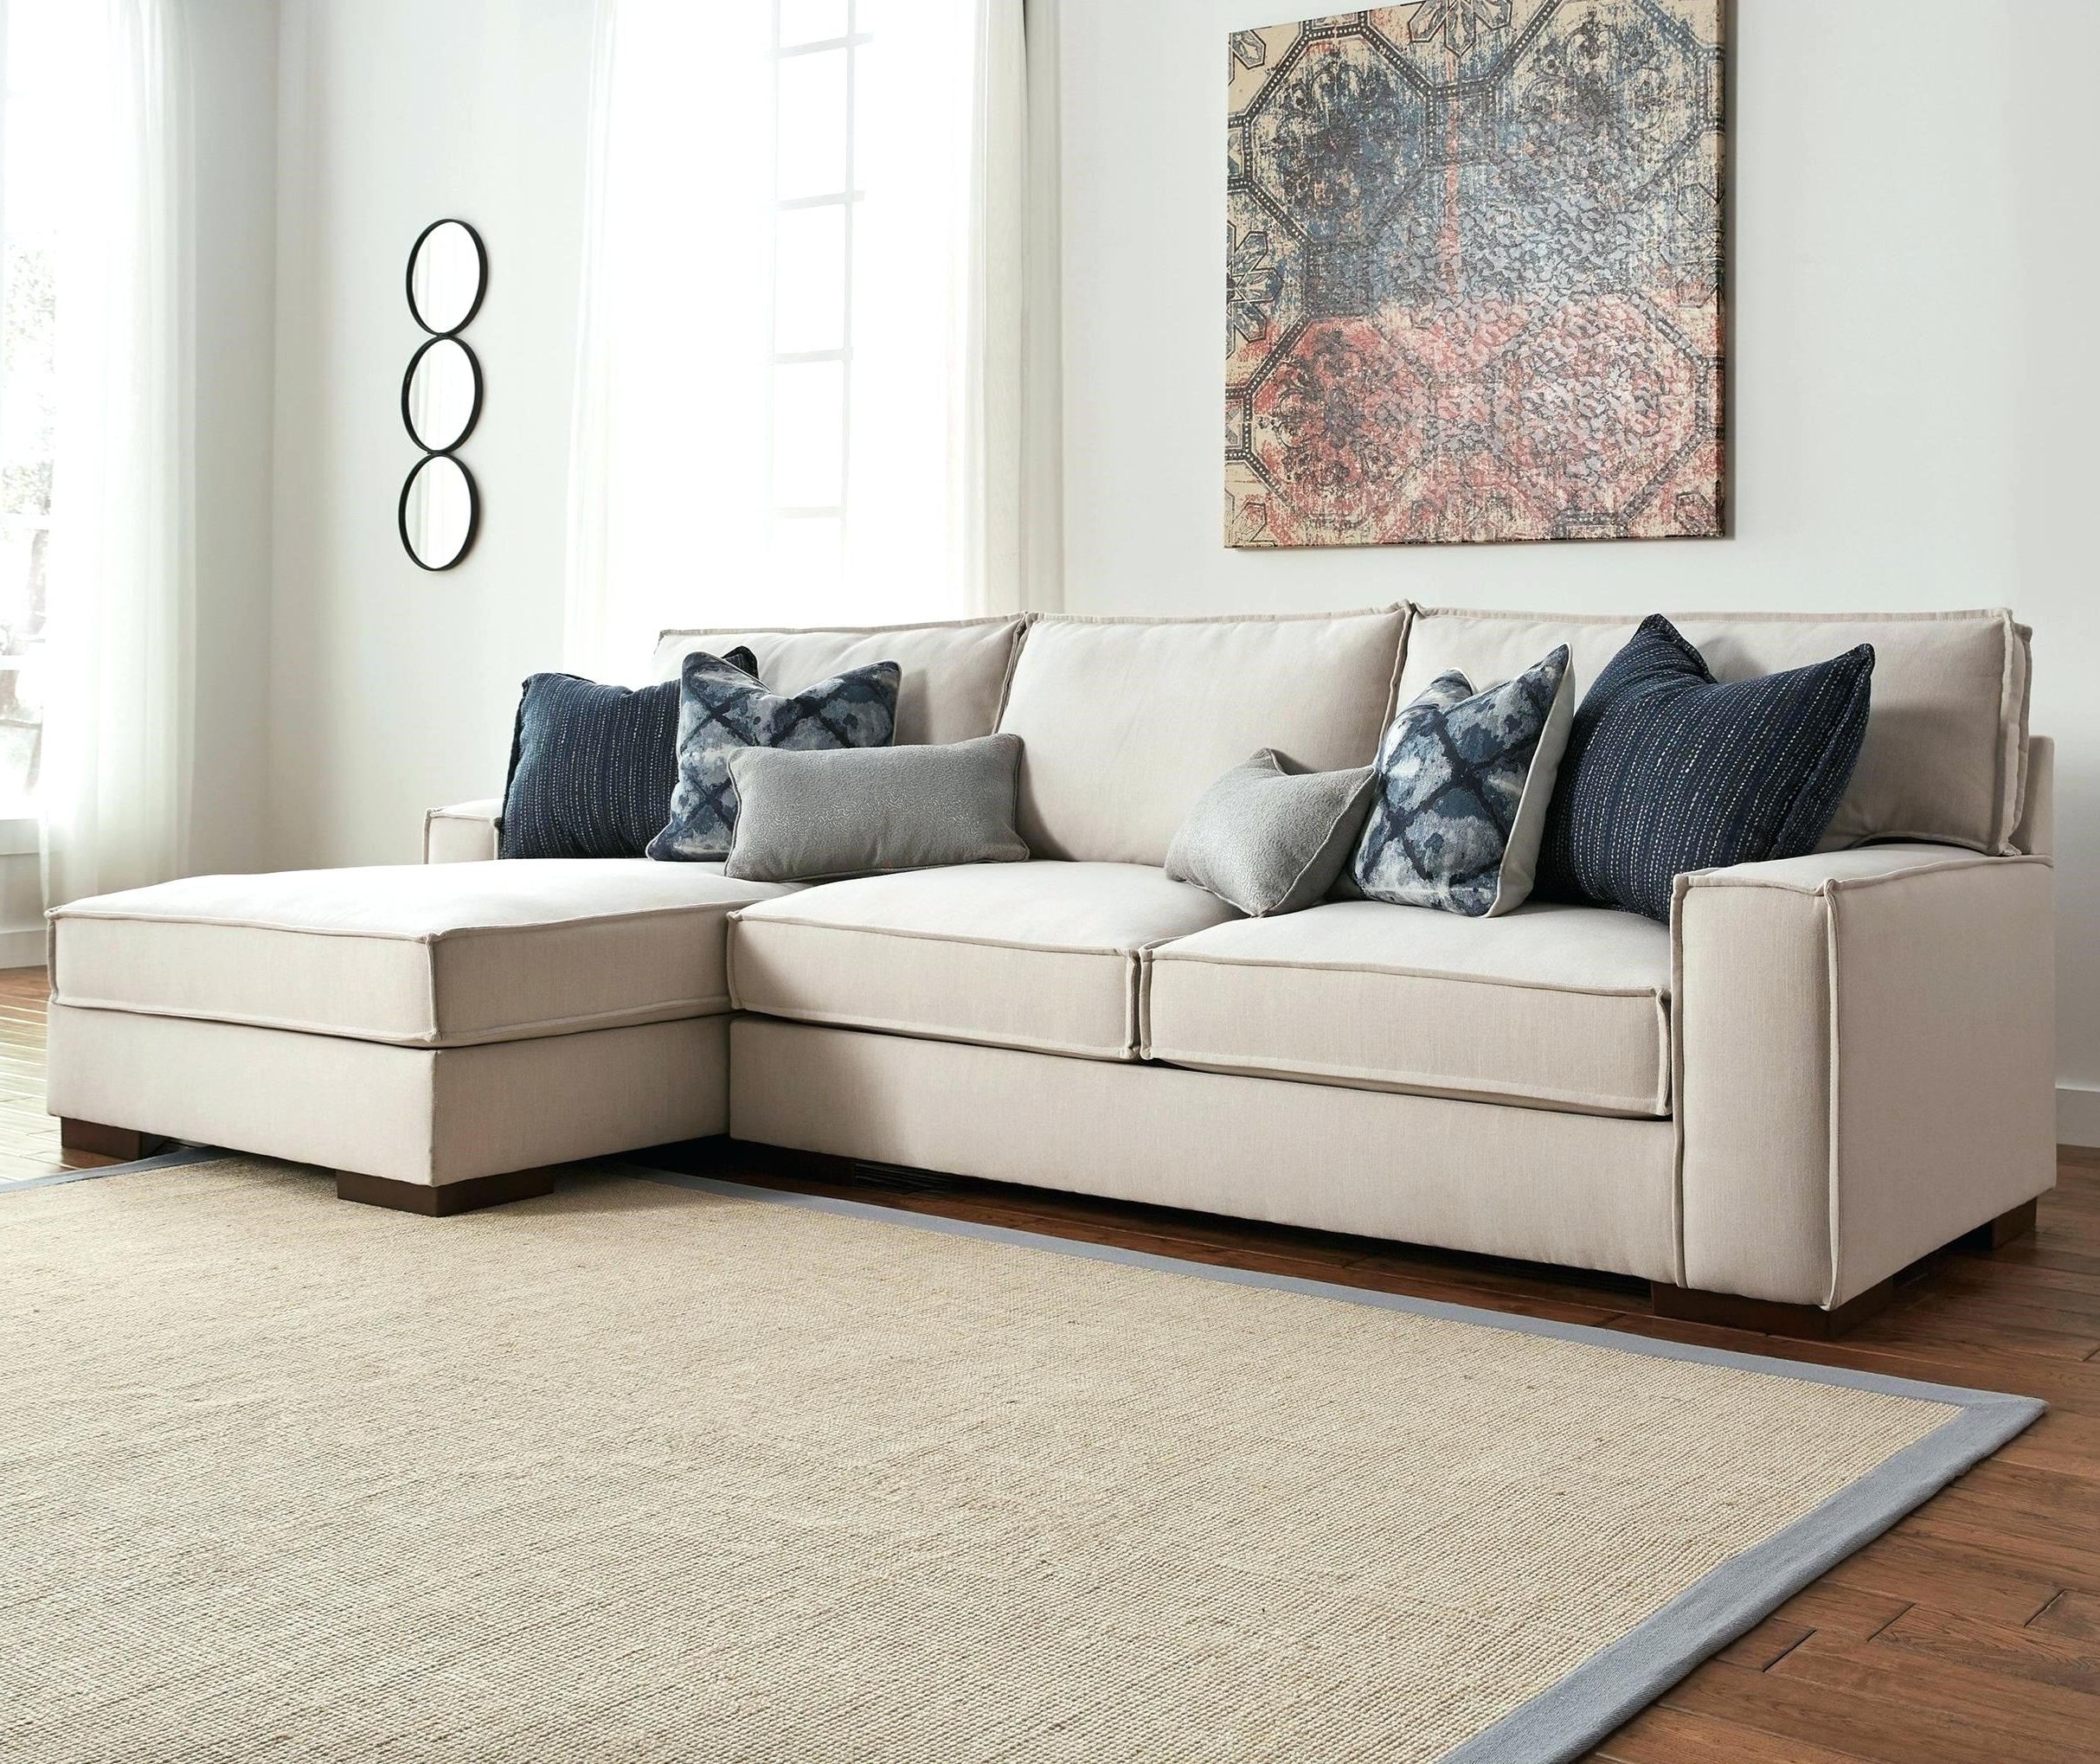 Denver Sectional Sofas With Regard To Trendy Sectional Sofas Denver Editions Tan Leather Sectional – Phoenixrpg (View 12 of 20)